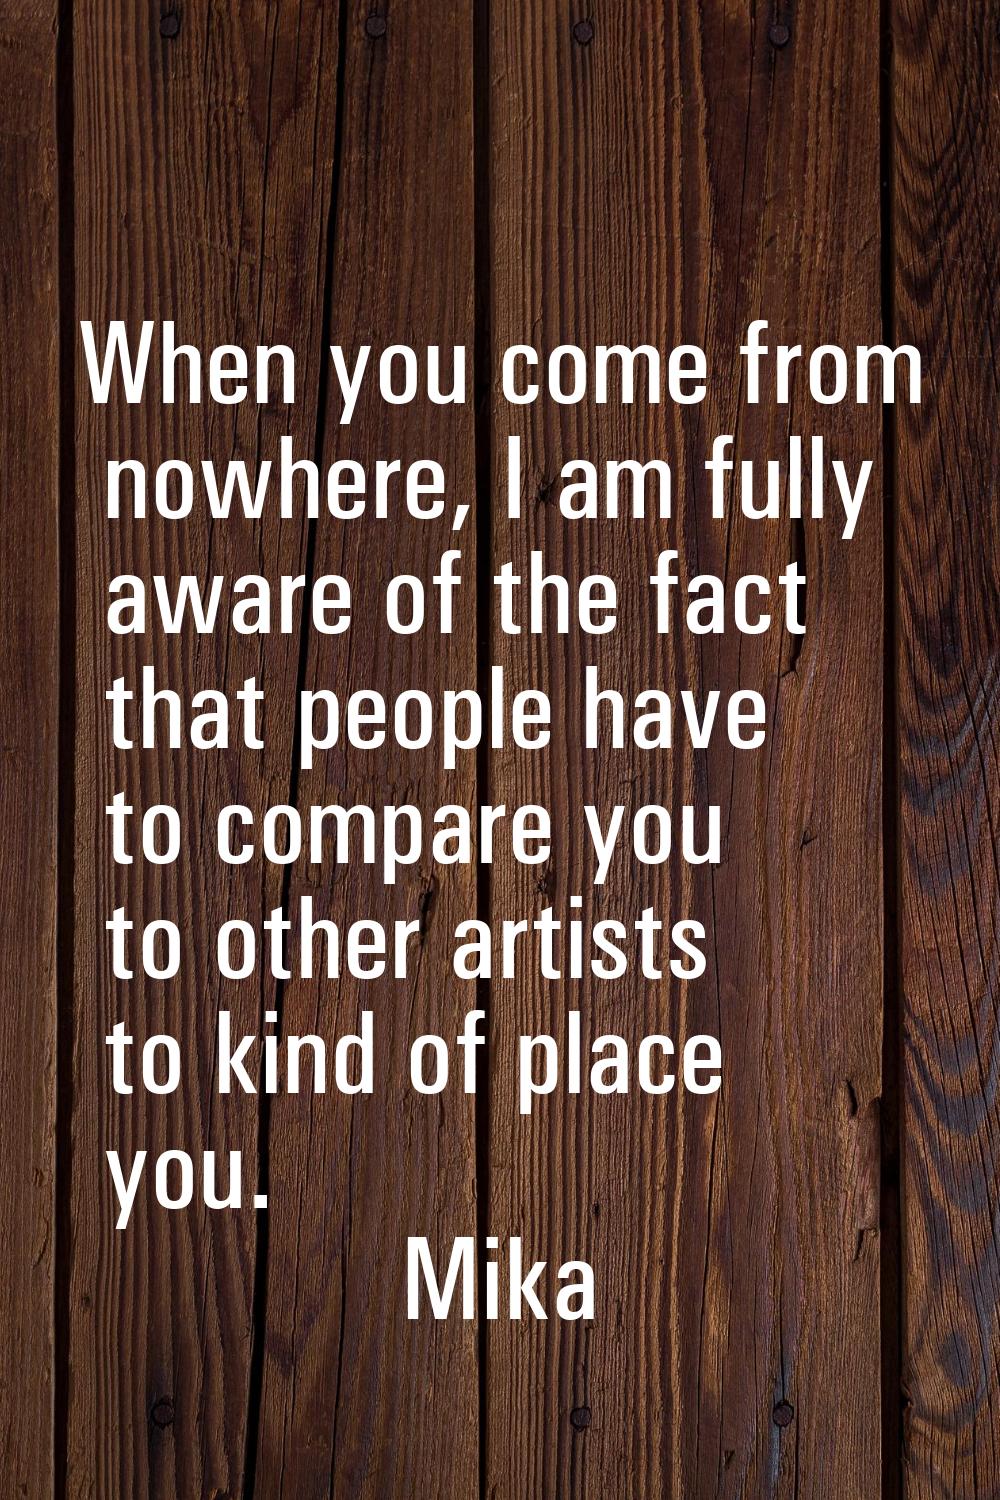 When you come from nowhere, I am fully aware of the fact that people have to compare you to other a